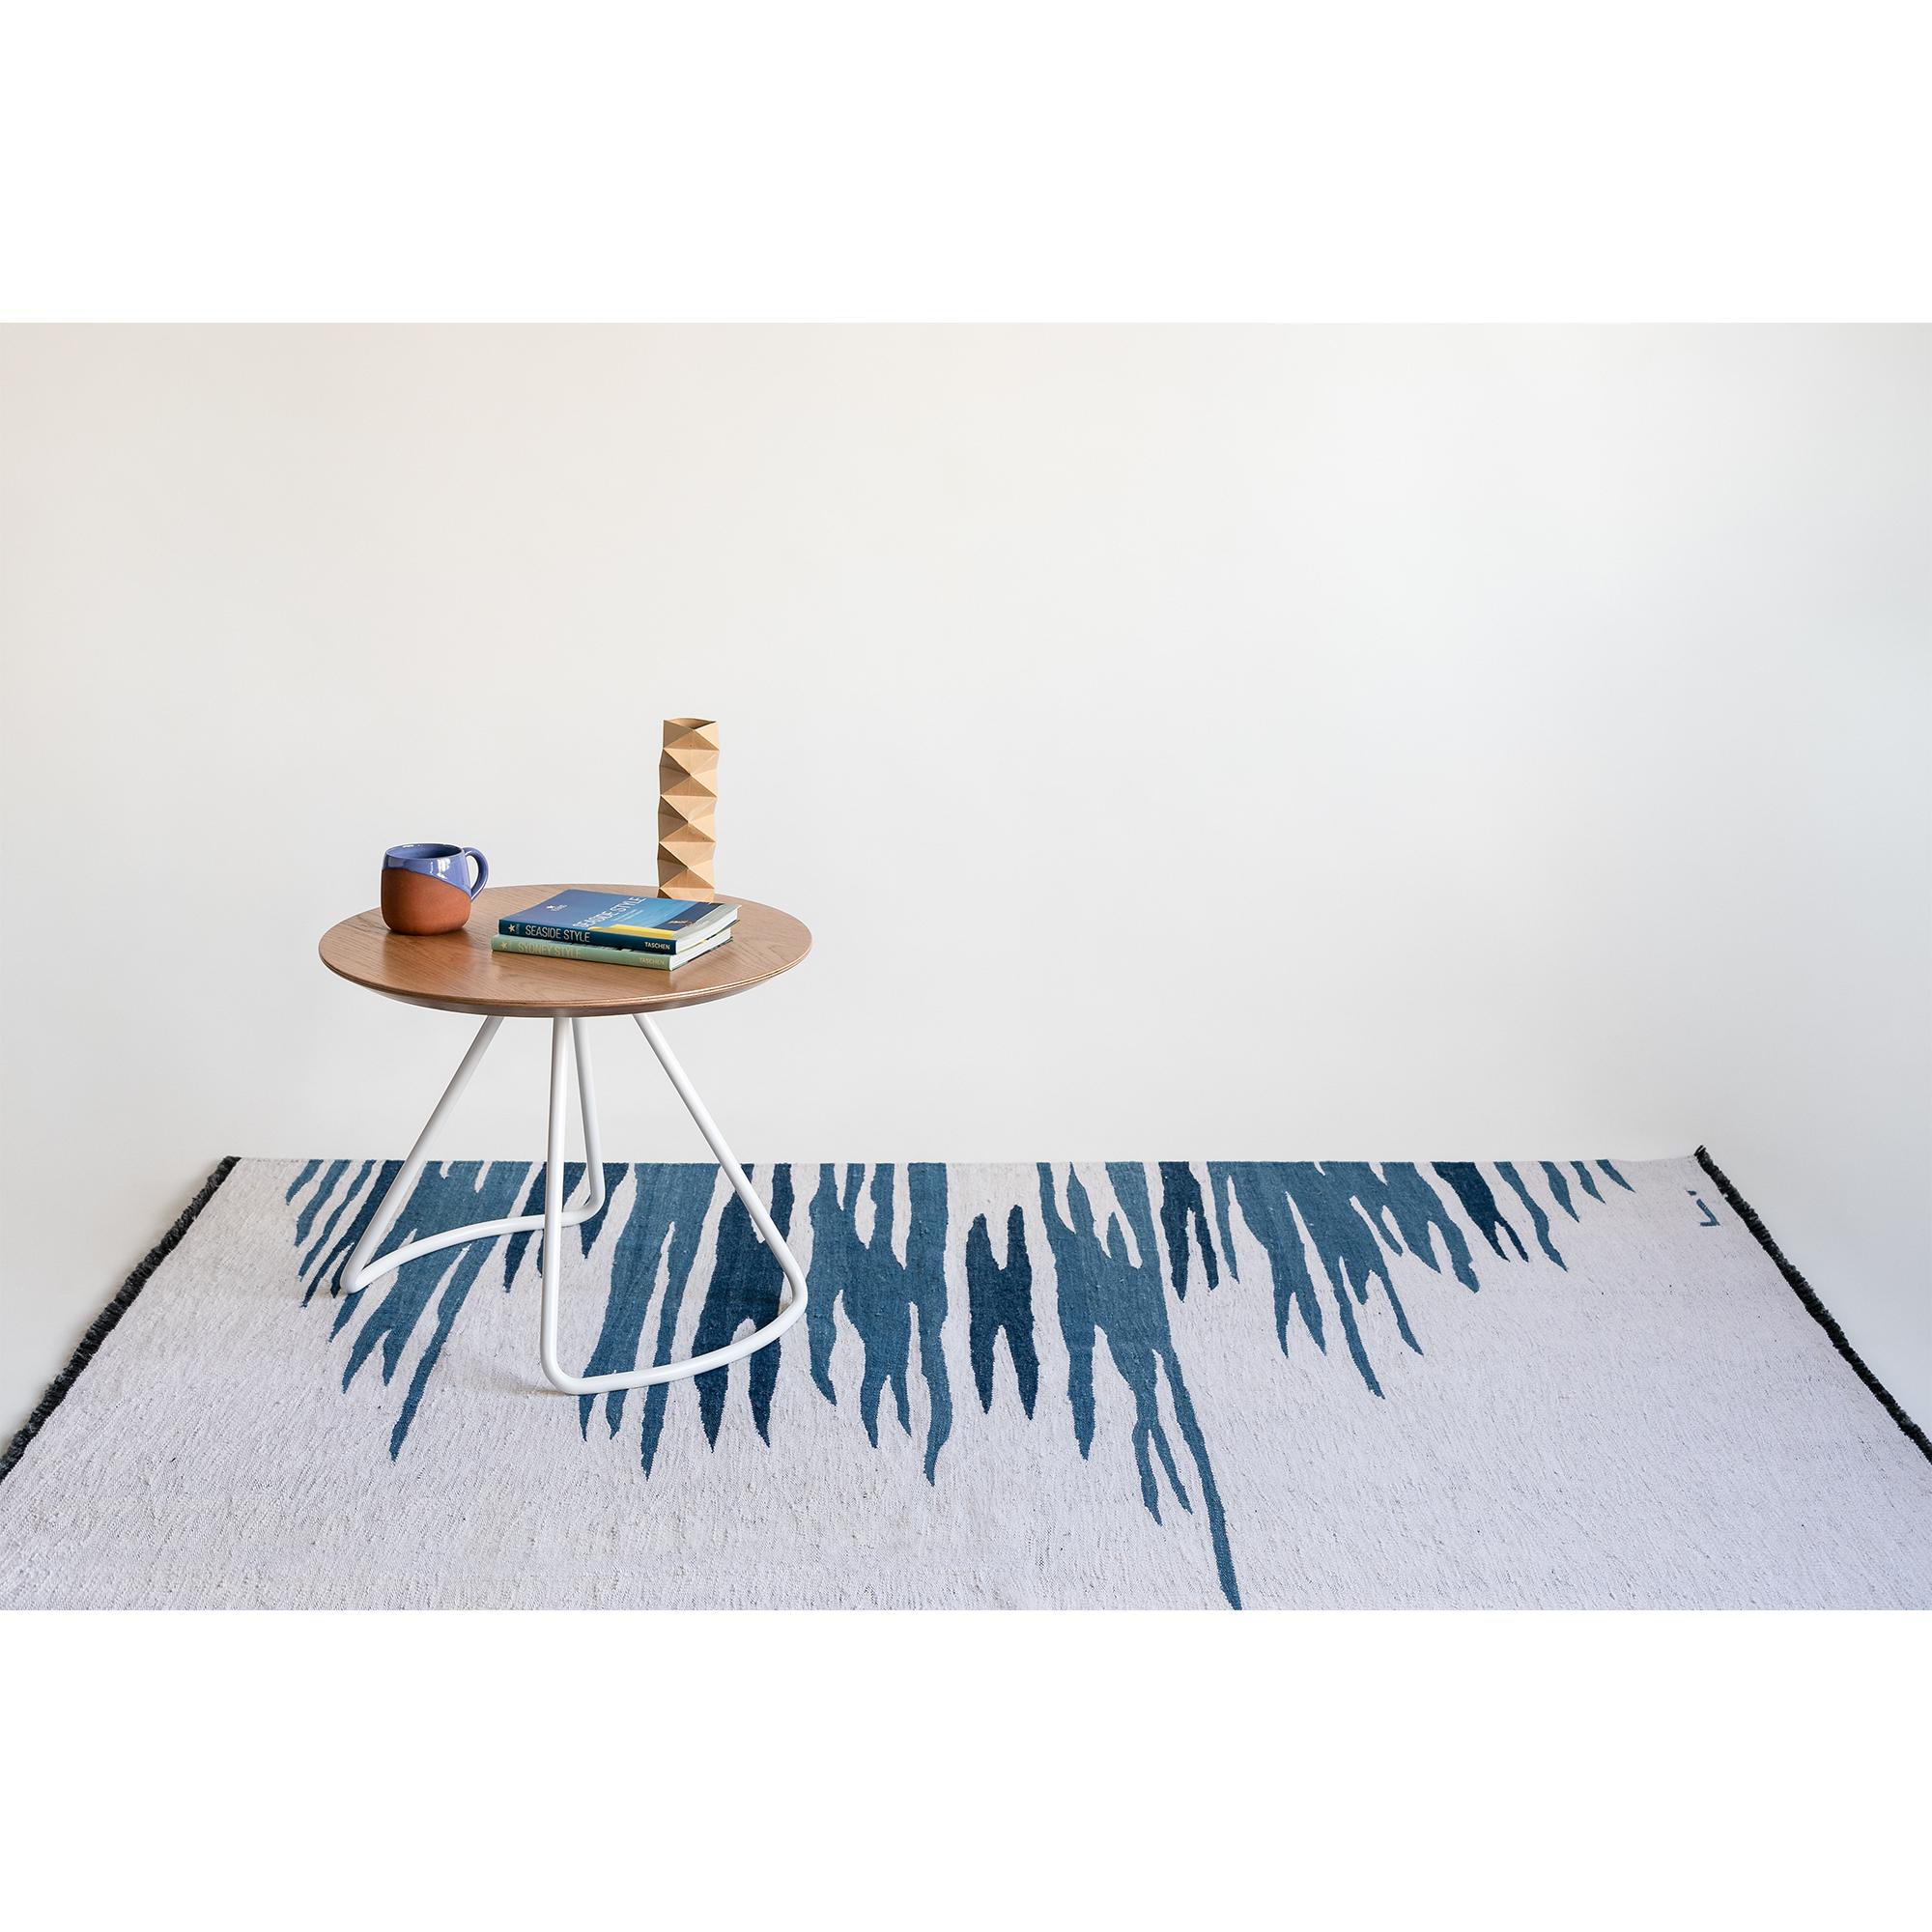 Ege No 2 kilim rug is part of a series of kilims that reflect an admiration for the visual and emotional expressiveness of the sea surface, with its fluid movements, and hues of color reflections that create a relaxing effect on the human psyche.